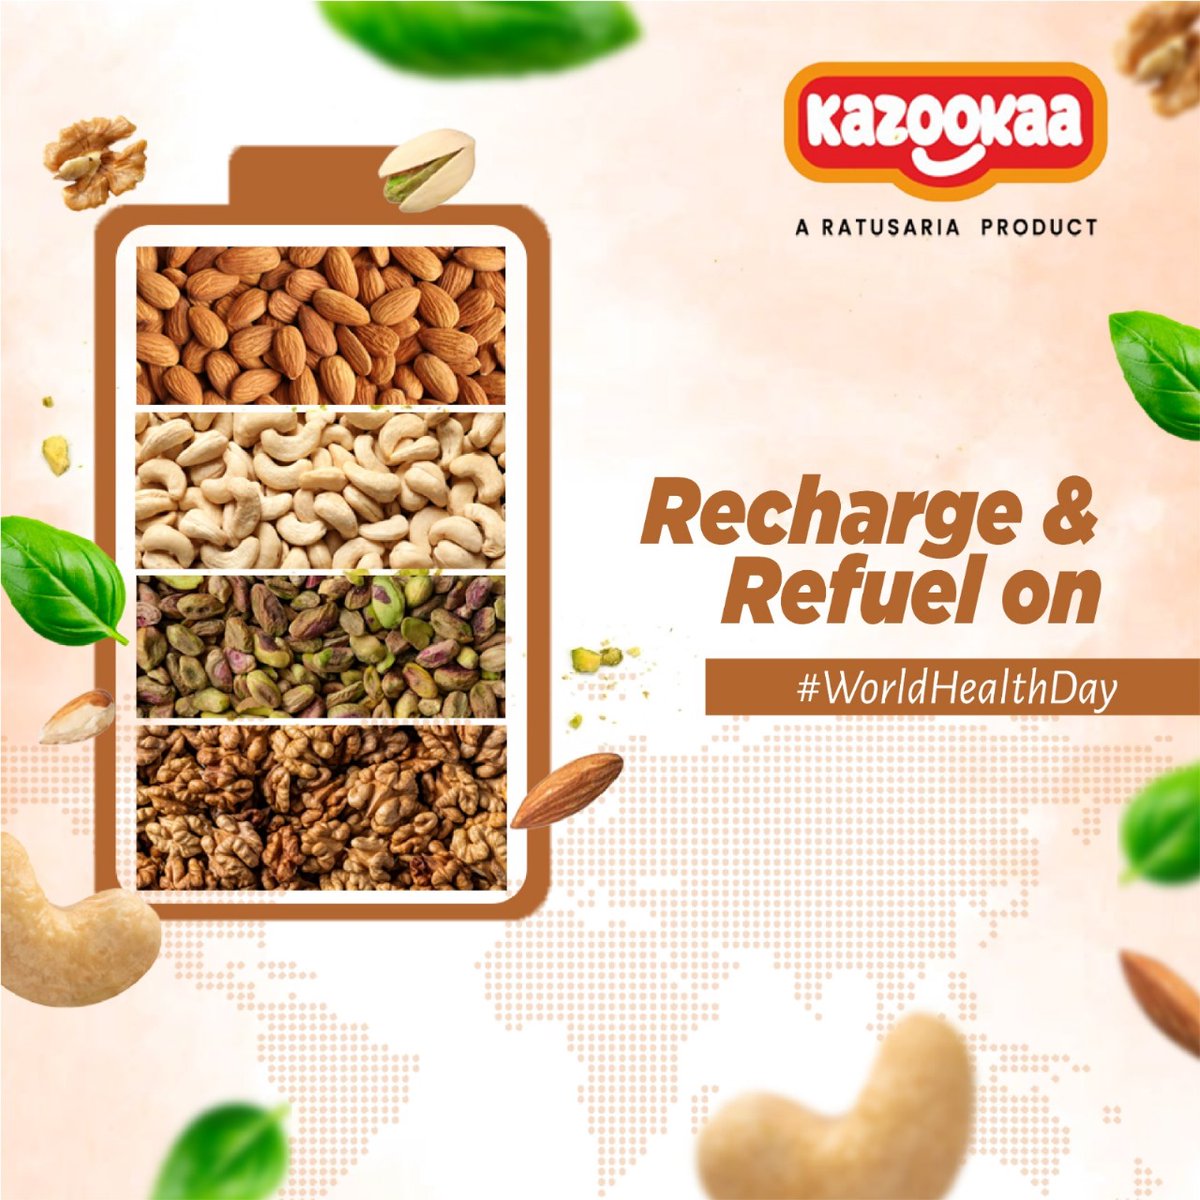 Elevate your health game with our range of nutritious dry fruits this World Health Day!

#kazooka #nutrition #healthyhearthealthylife #healthyfood #amazonessentials #almonds #raisins #pistachio #crispy #crunchy #flavour #cashews #wholesome #irresistible #ordernow #WorldHealthDay